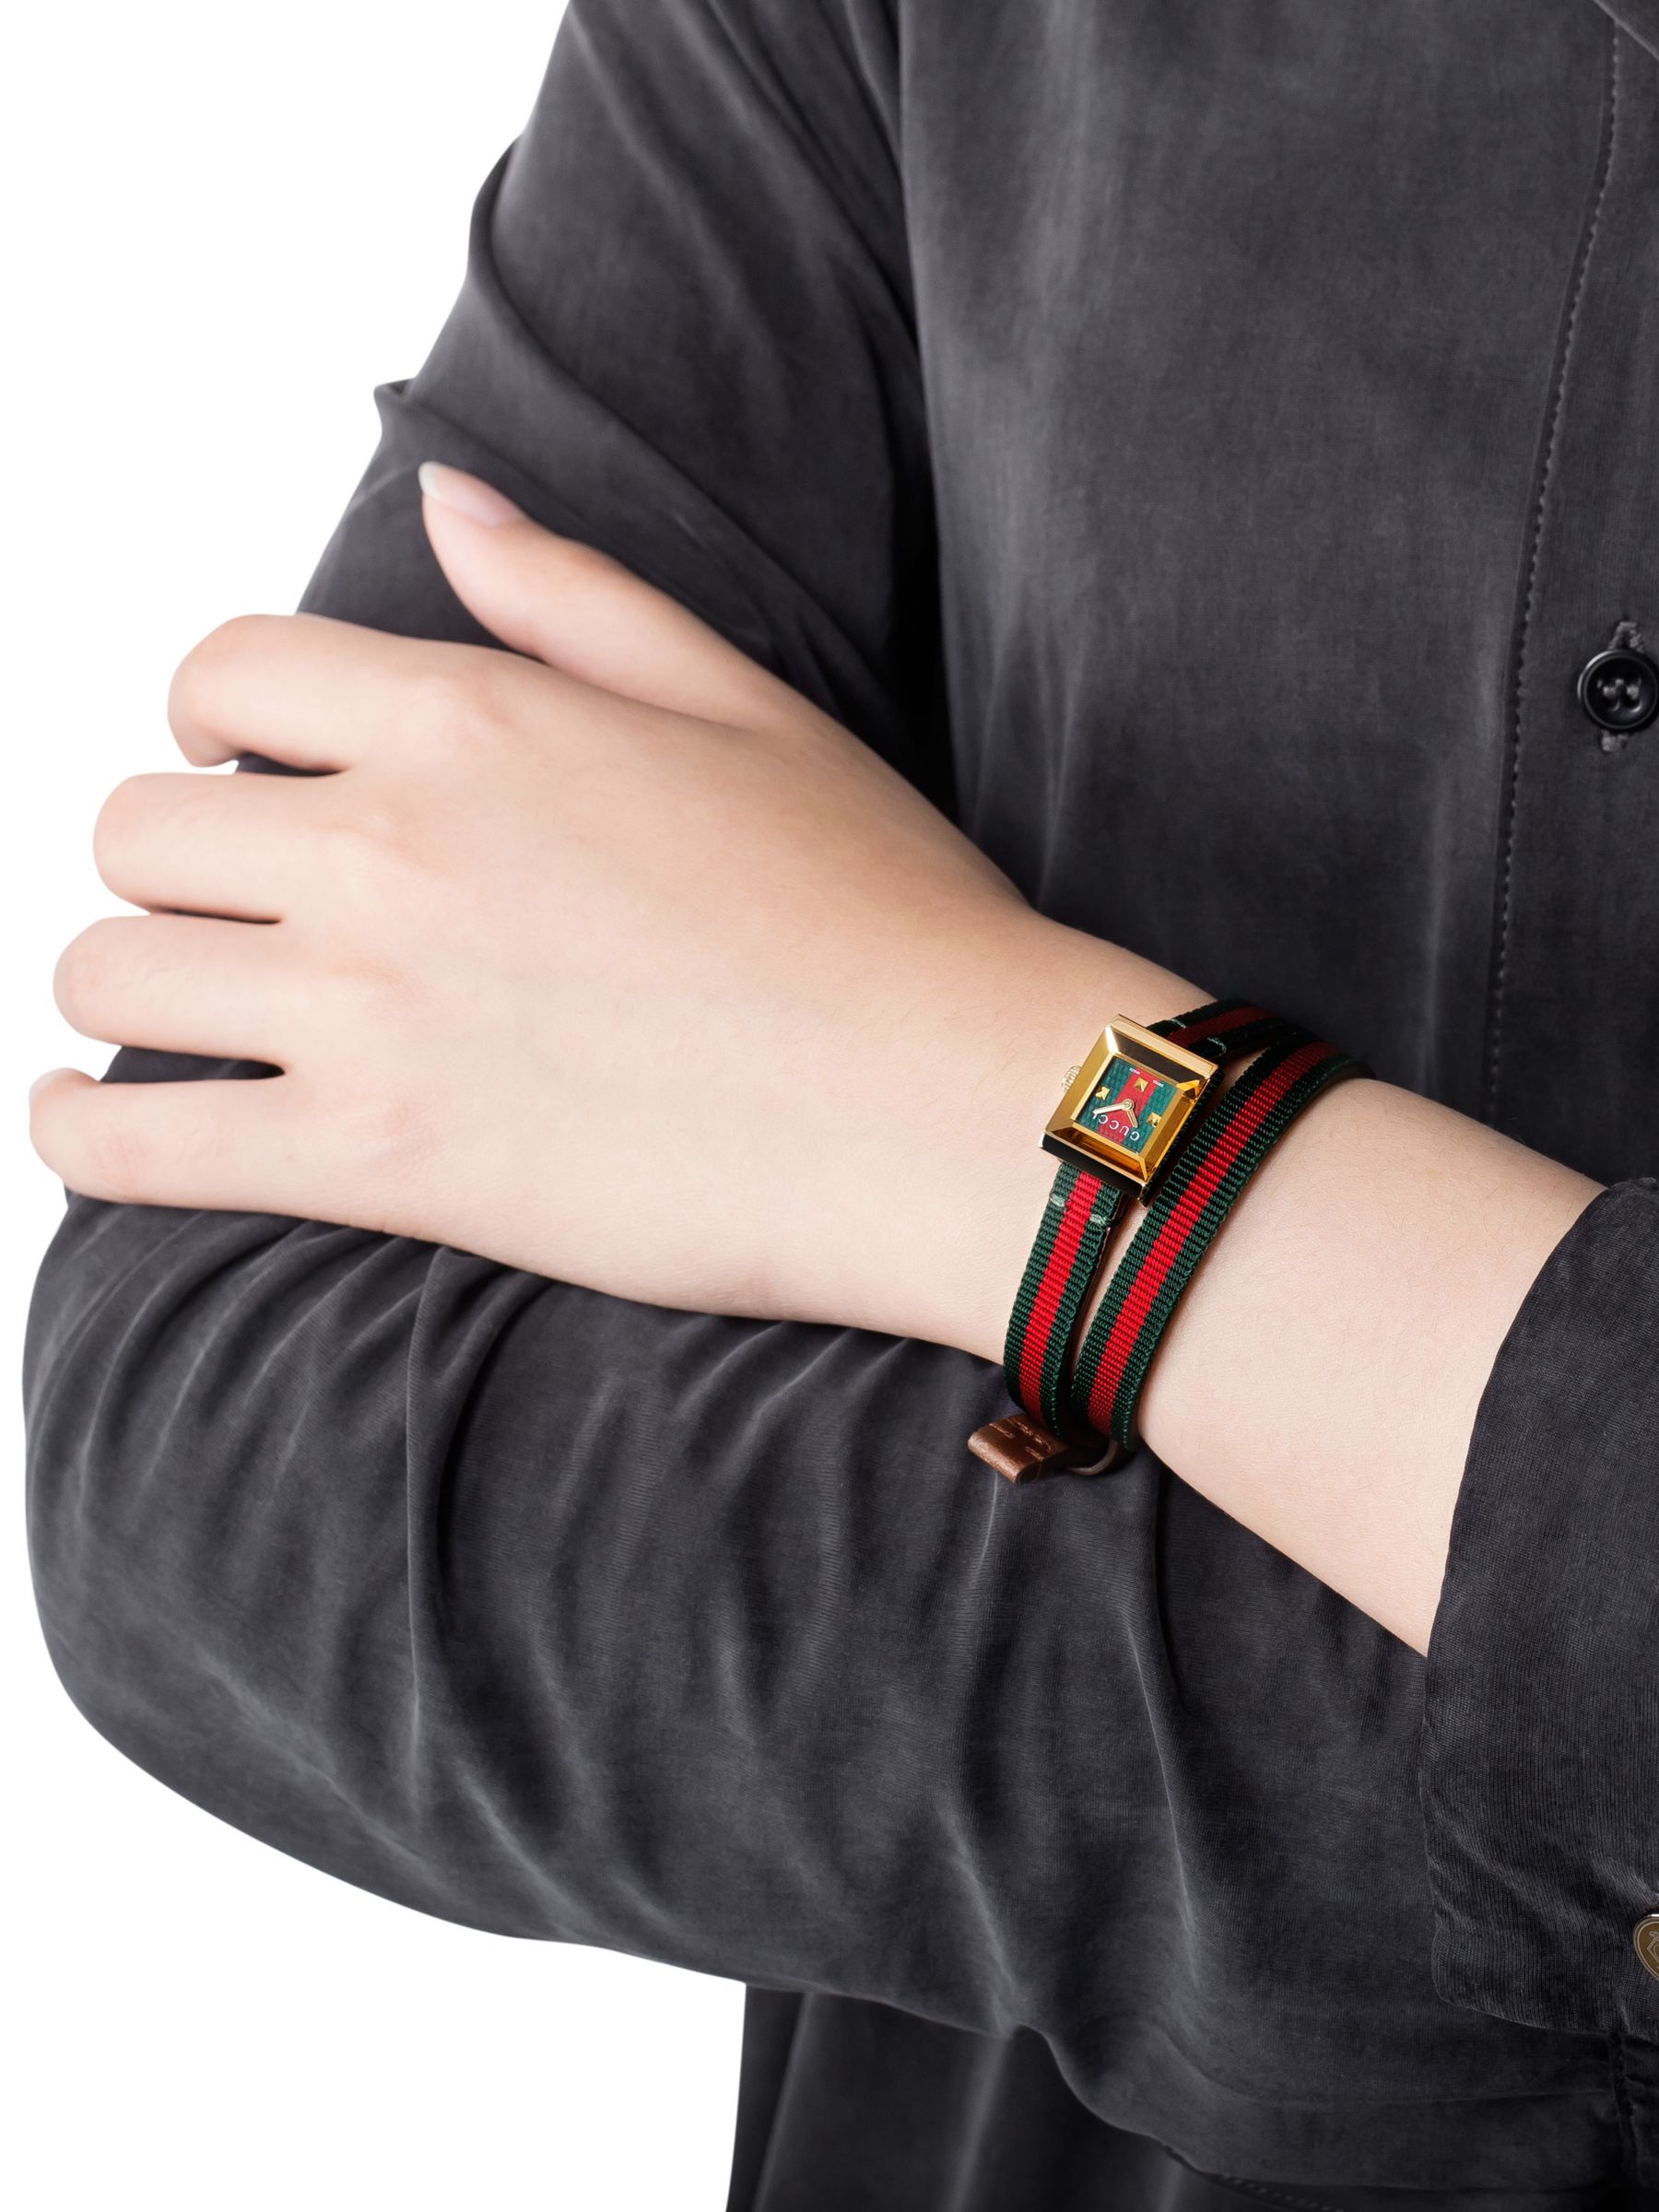 gucci green and red bracelet